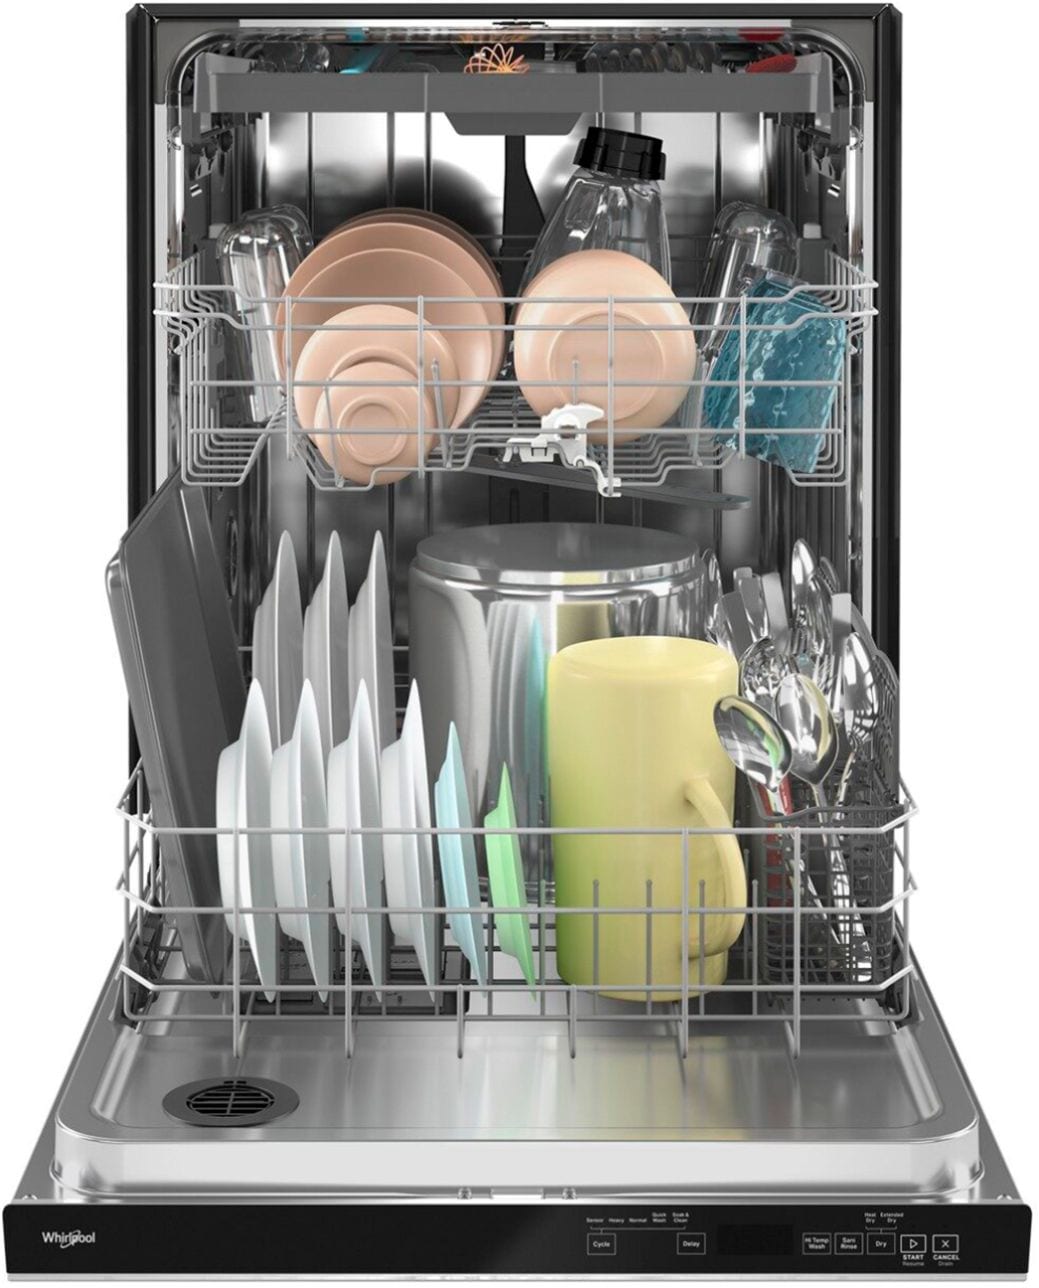 Whirlpool - 24" Top Control Built-In Dishwasher with Stainless Steel Tub, Large Capacity, 3rd Rack, 47 dBA - Stainless steel_9